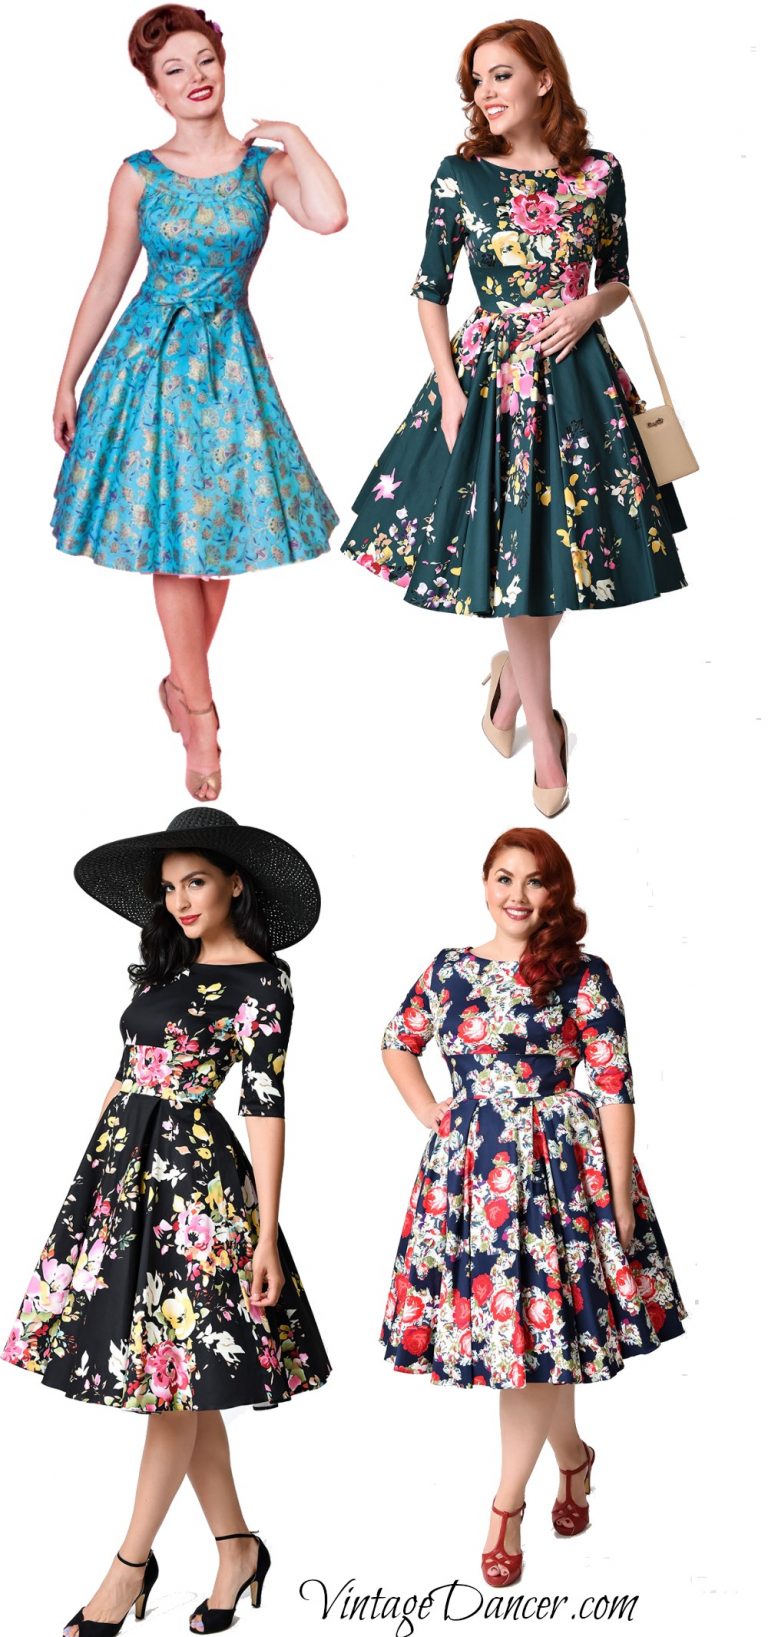 New Fifties Dresses | 50s Inspired Dresses